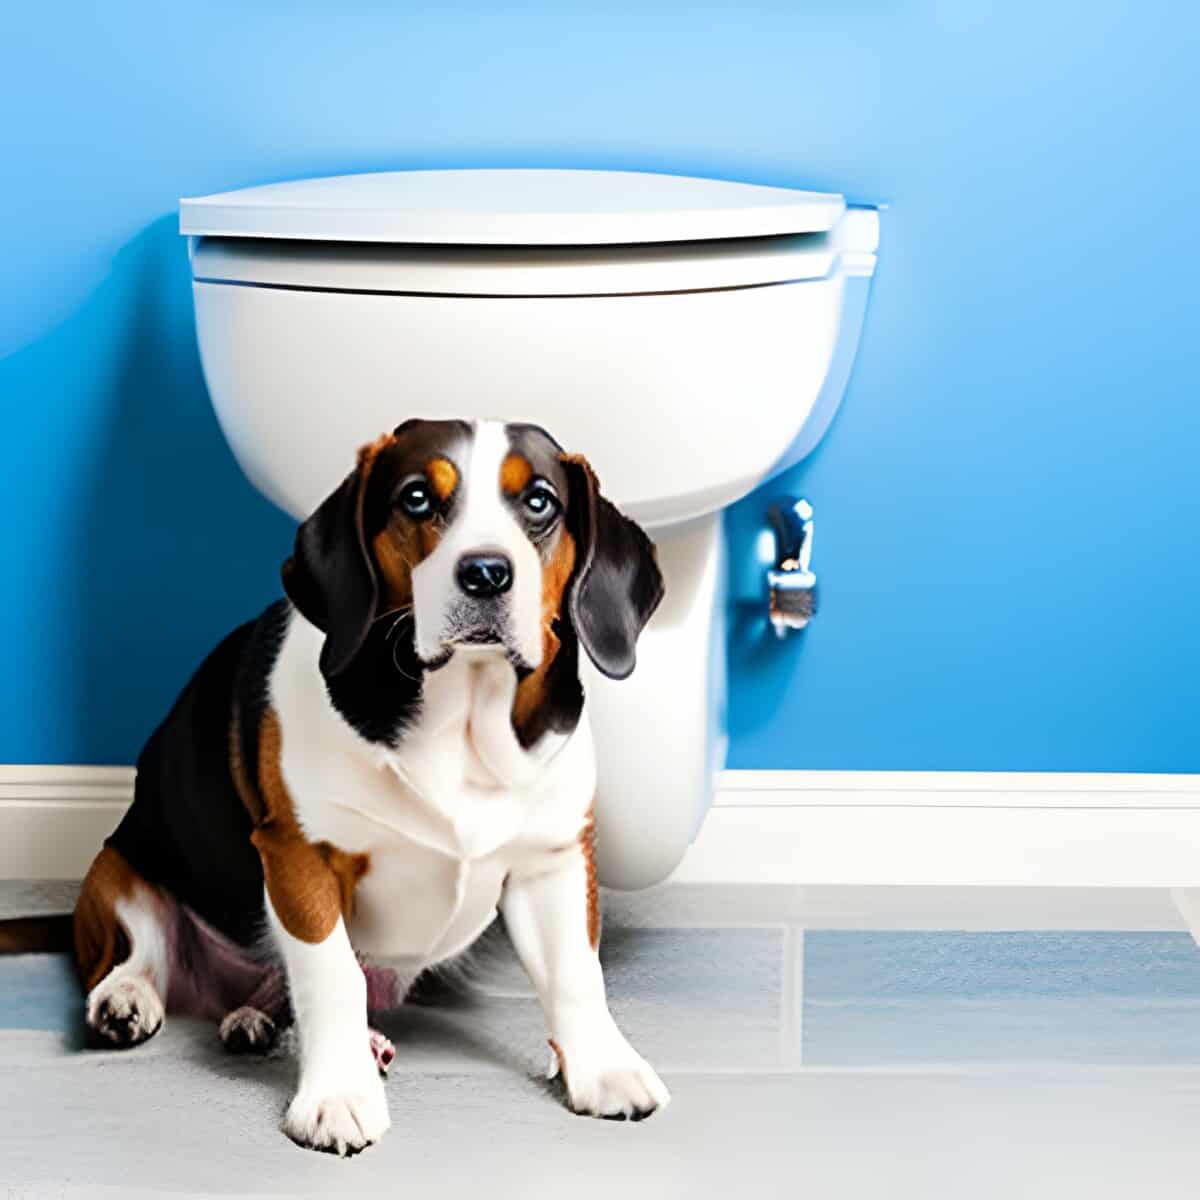 old dog sitting next to a toilet. Old dog incontinence